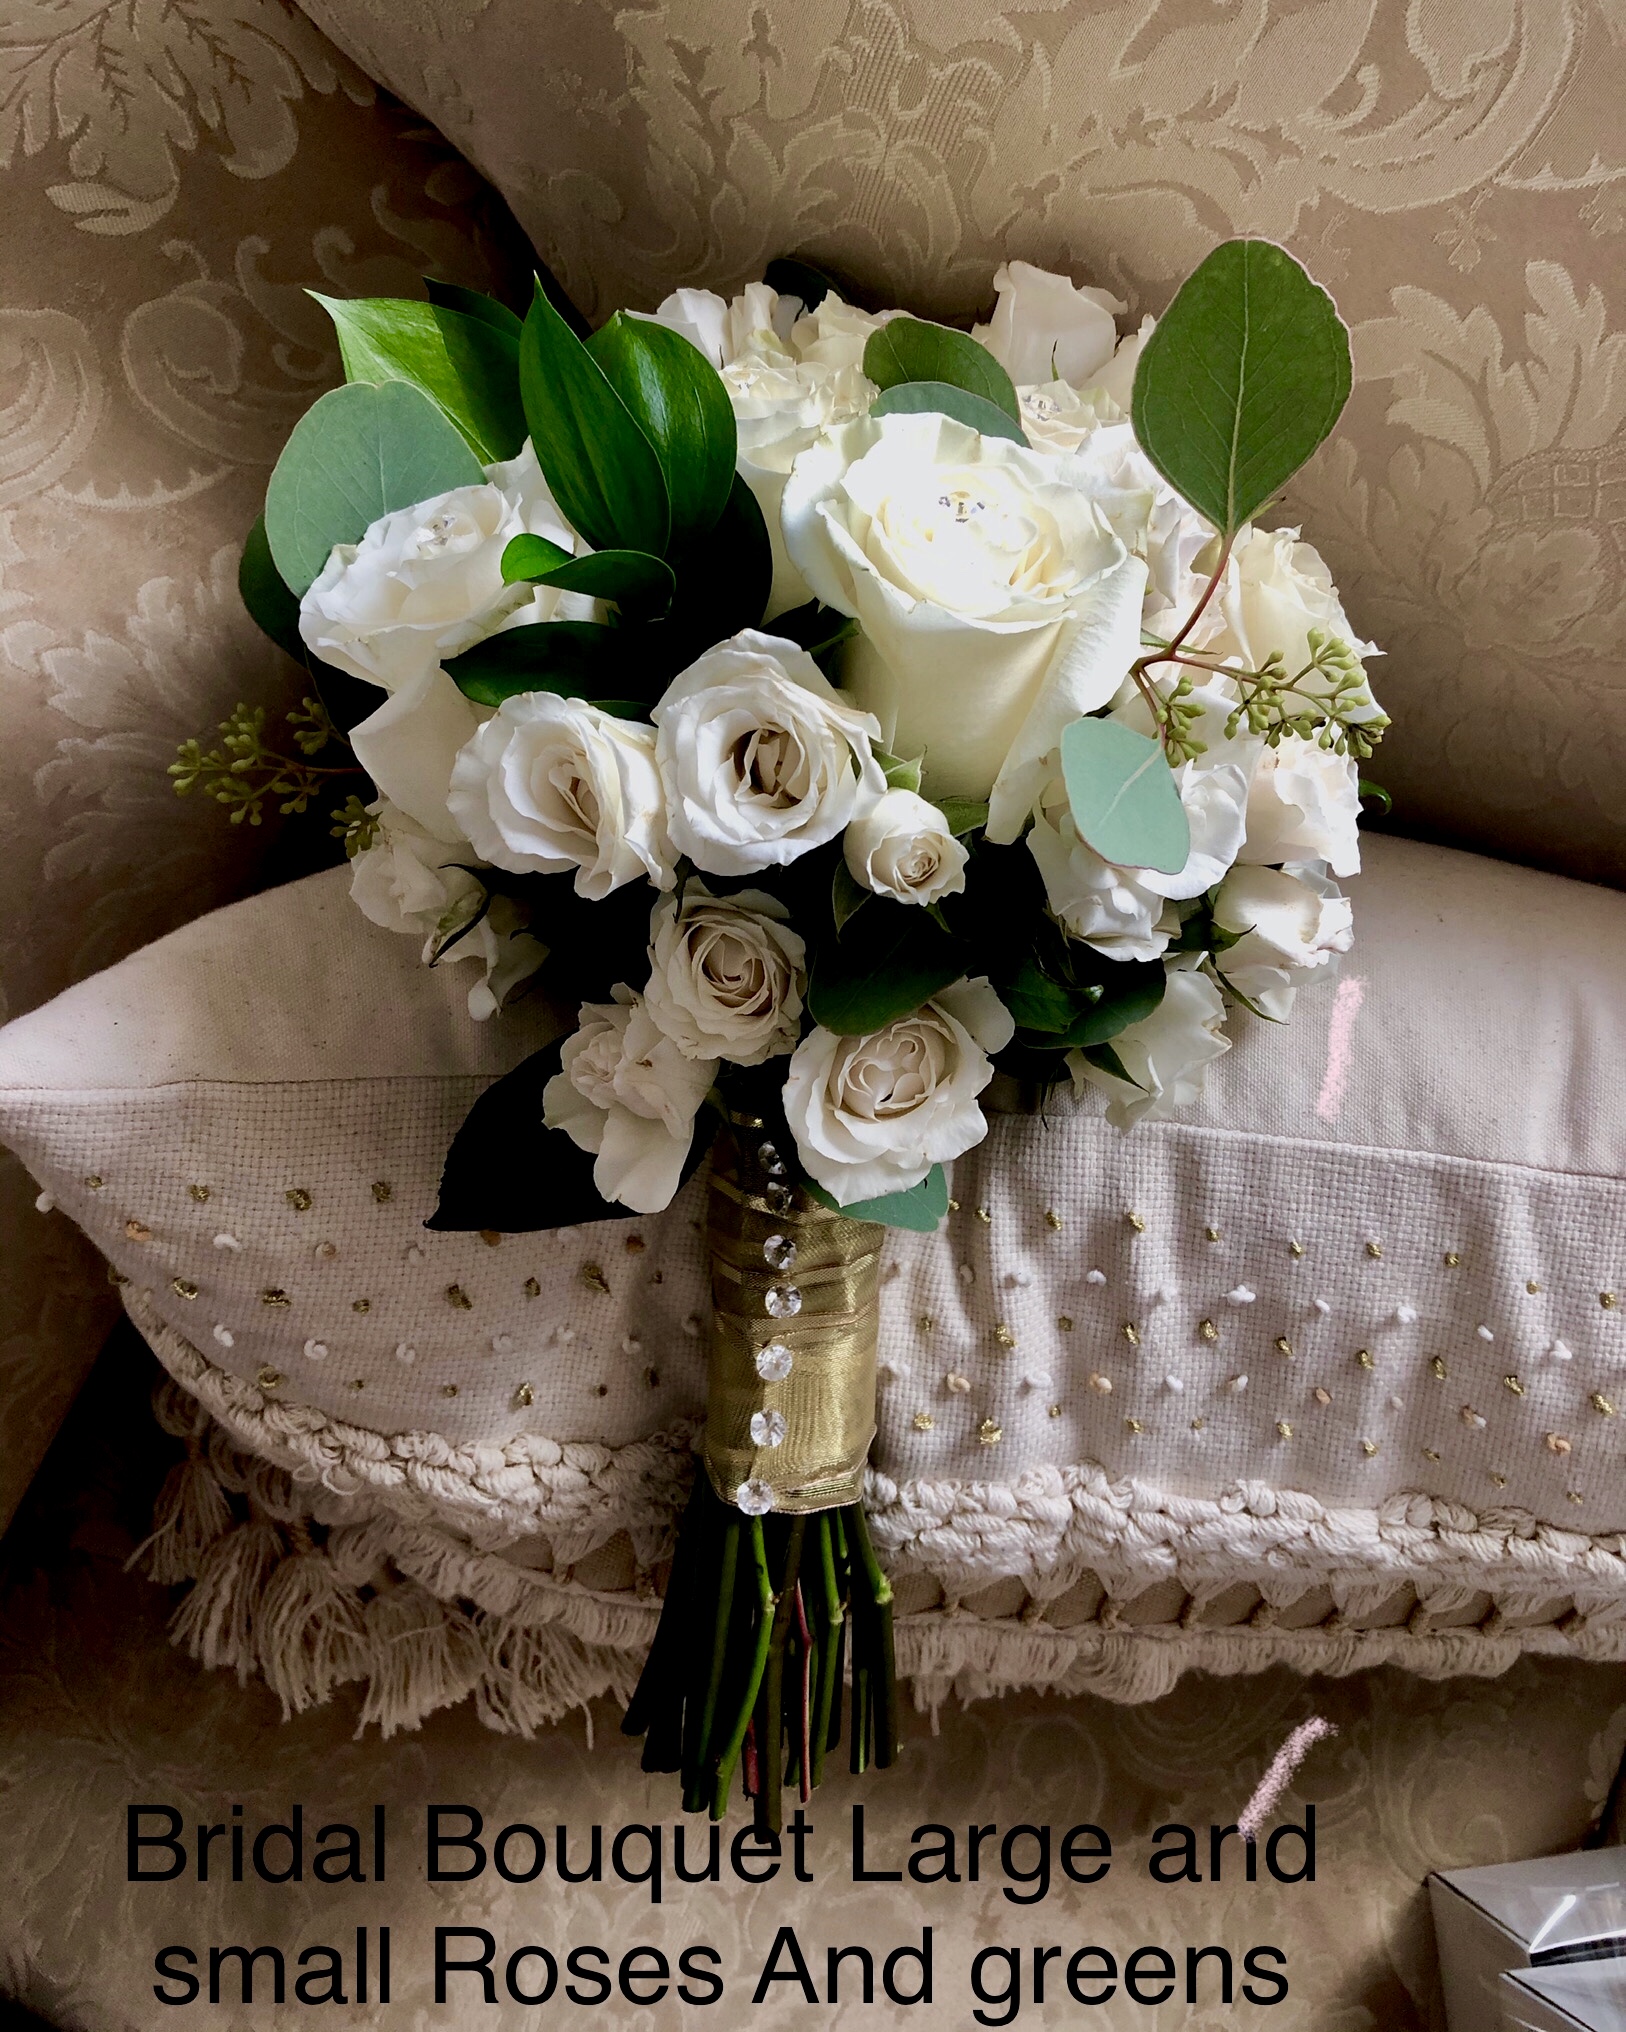 $130 Bridal Bouquet Large / Small Roses /Greens 